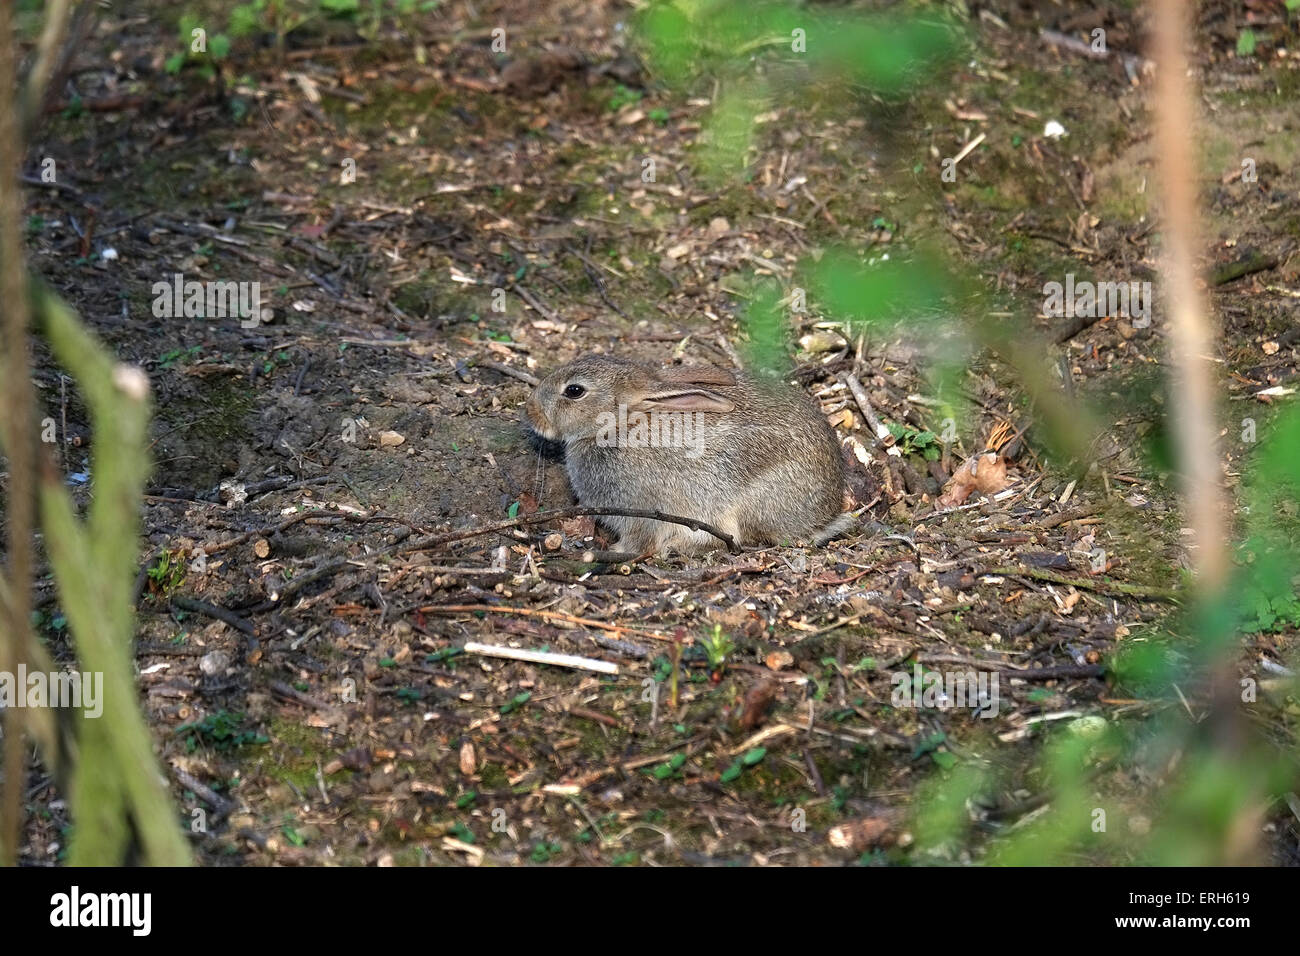 Young rabbit in shade. Stock Photo